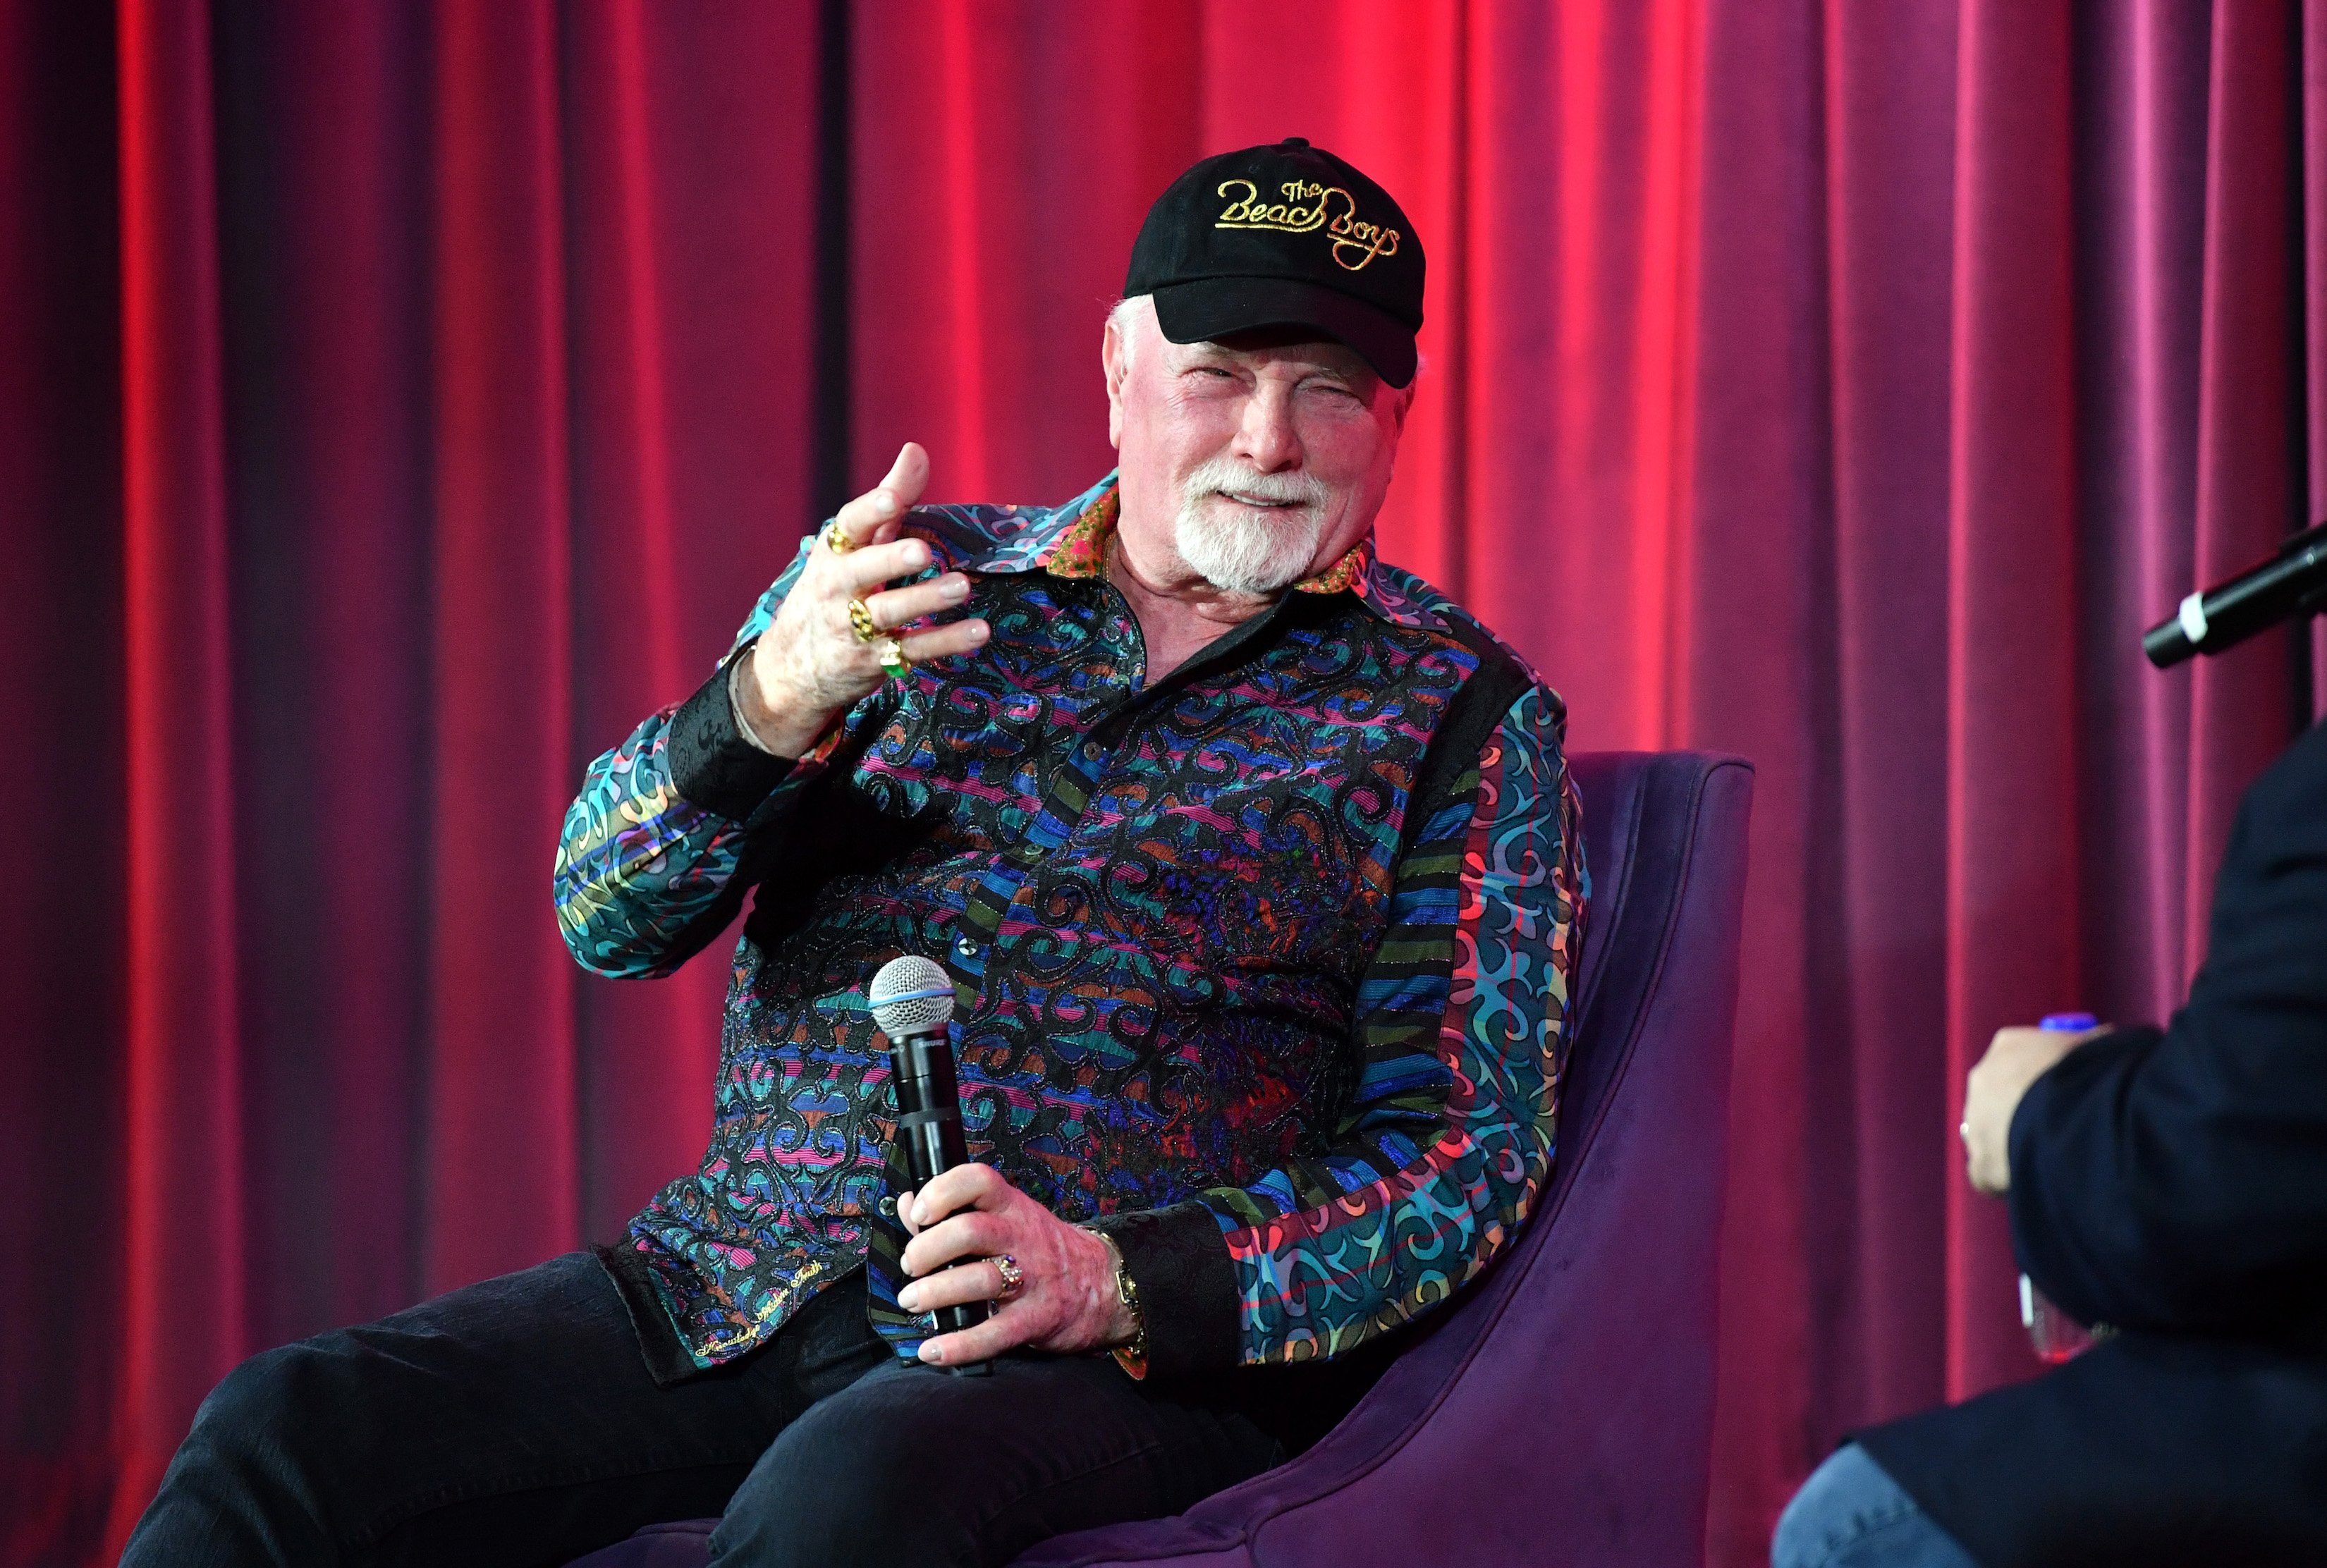 Mike Love of The Beach Boys speaks during a celebration of The Beach Boys' Sail on Sailor - 1972 at The GRAMMY Museum